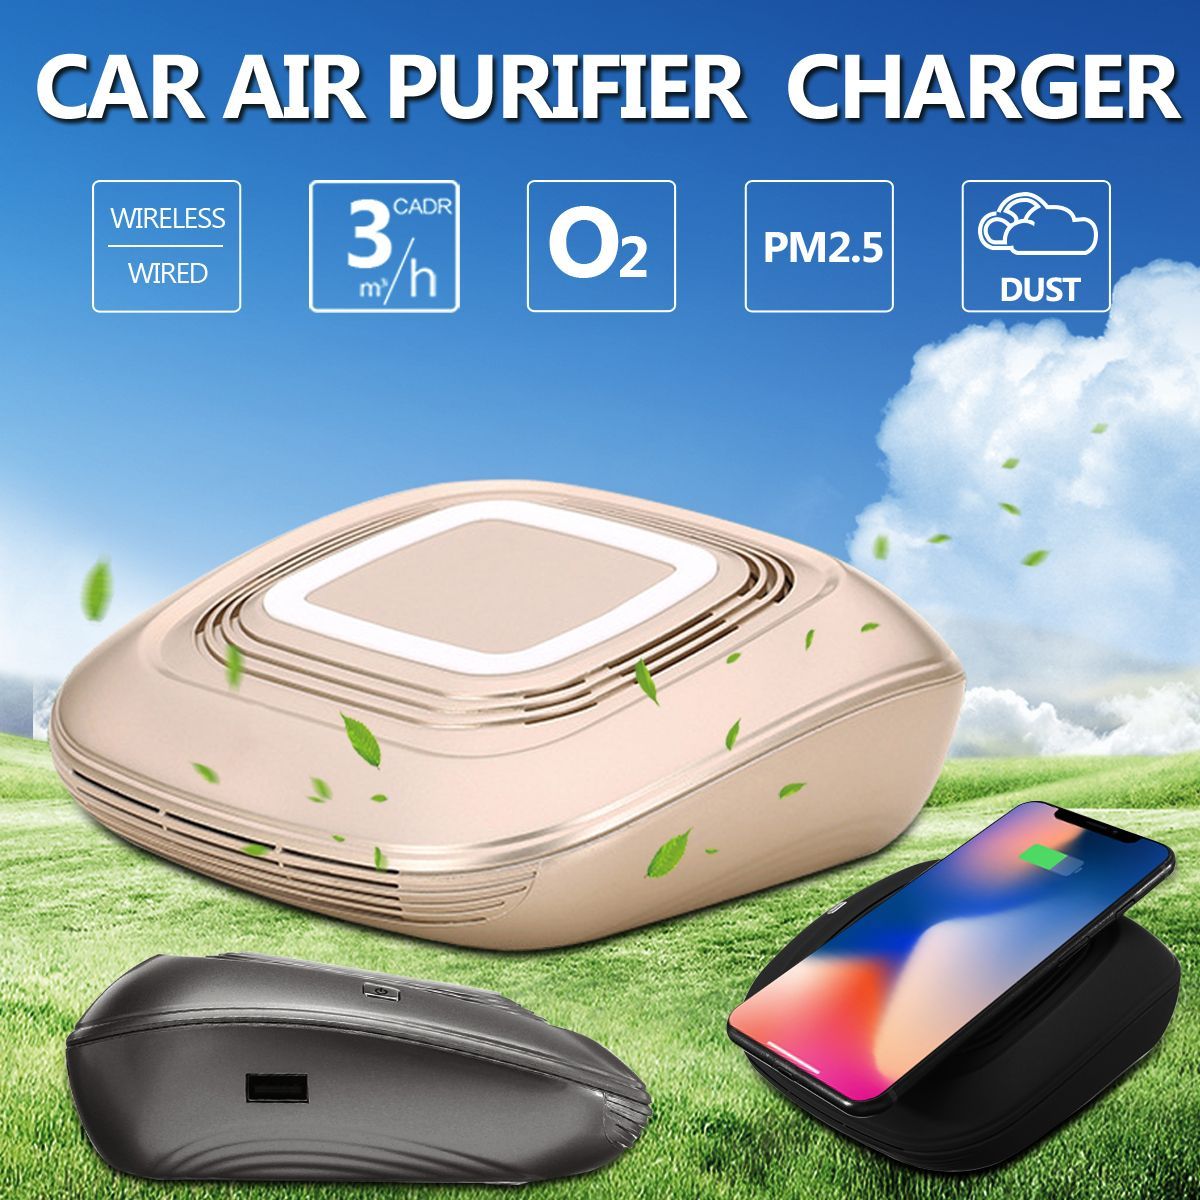 C25-Car-Fresh-Air-Purifier-Qi-Wireless-Wired-Phone-Charger-Oxygen-Ionic-Bar-PM25-1230531